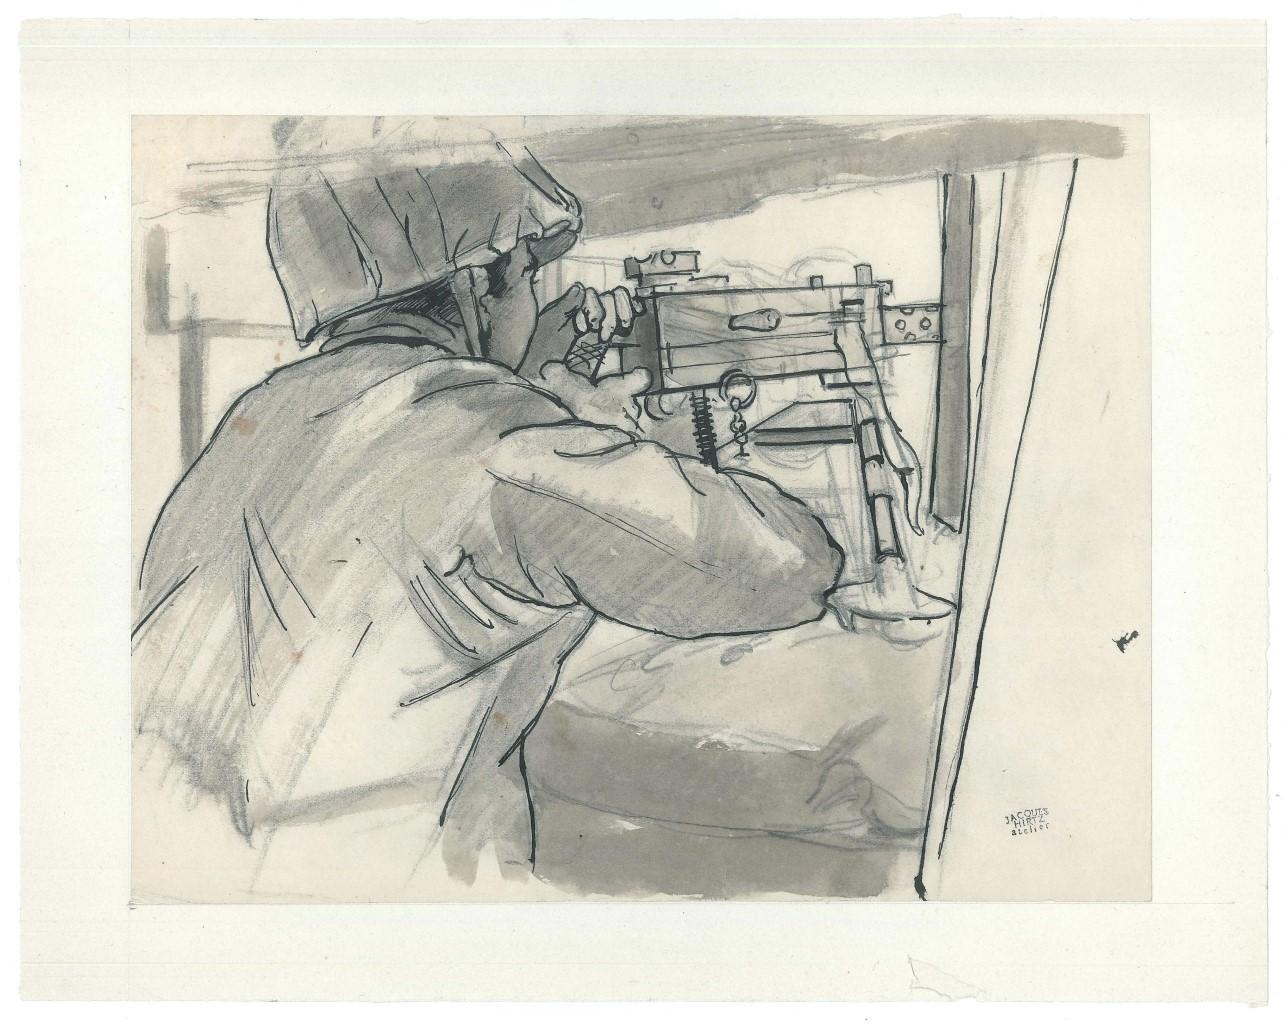 "The Submachine Gun"  is an original black watercolored ink drawing on ivory-colored paper, glued on cardboard, by Jacques Hirtz (1905-1988).
In excellent conditions: as good as new.

Sheet dimension: 26 x 33 cm
 Image Dimensions: 20.8 x 27 cm

This